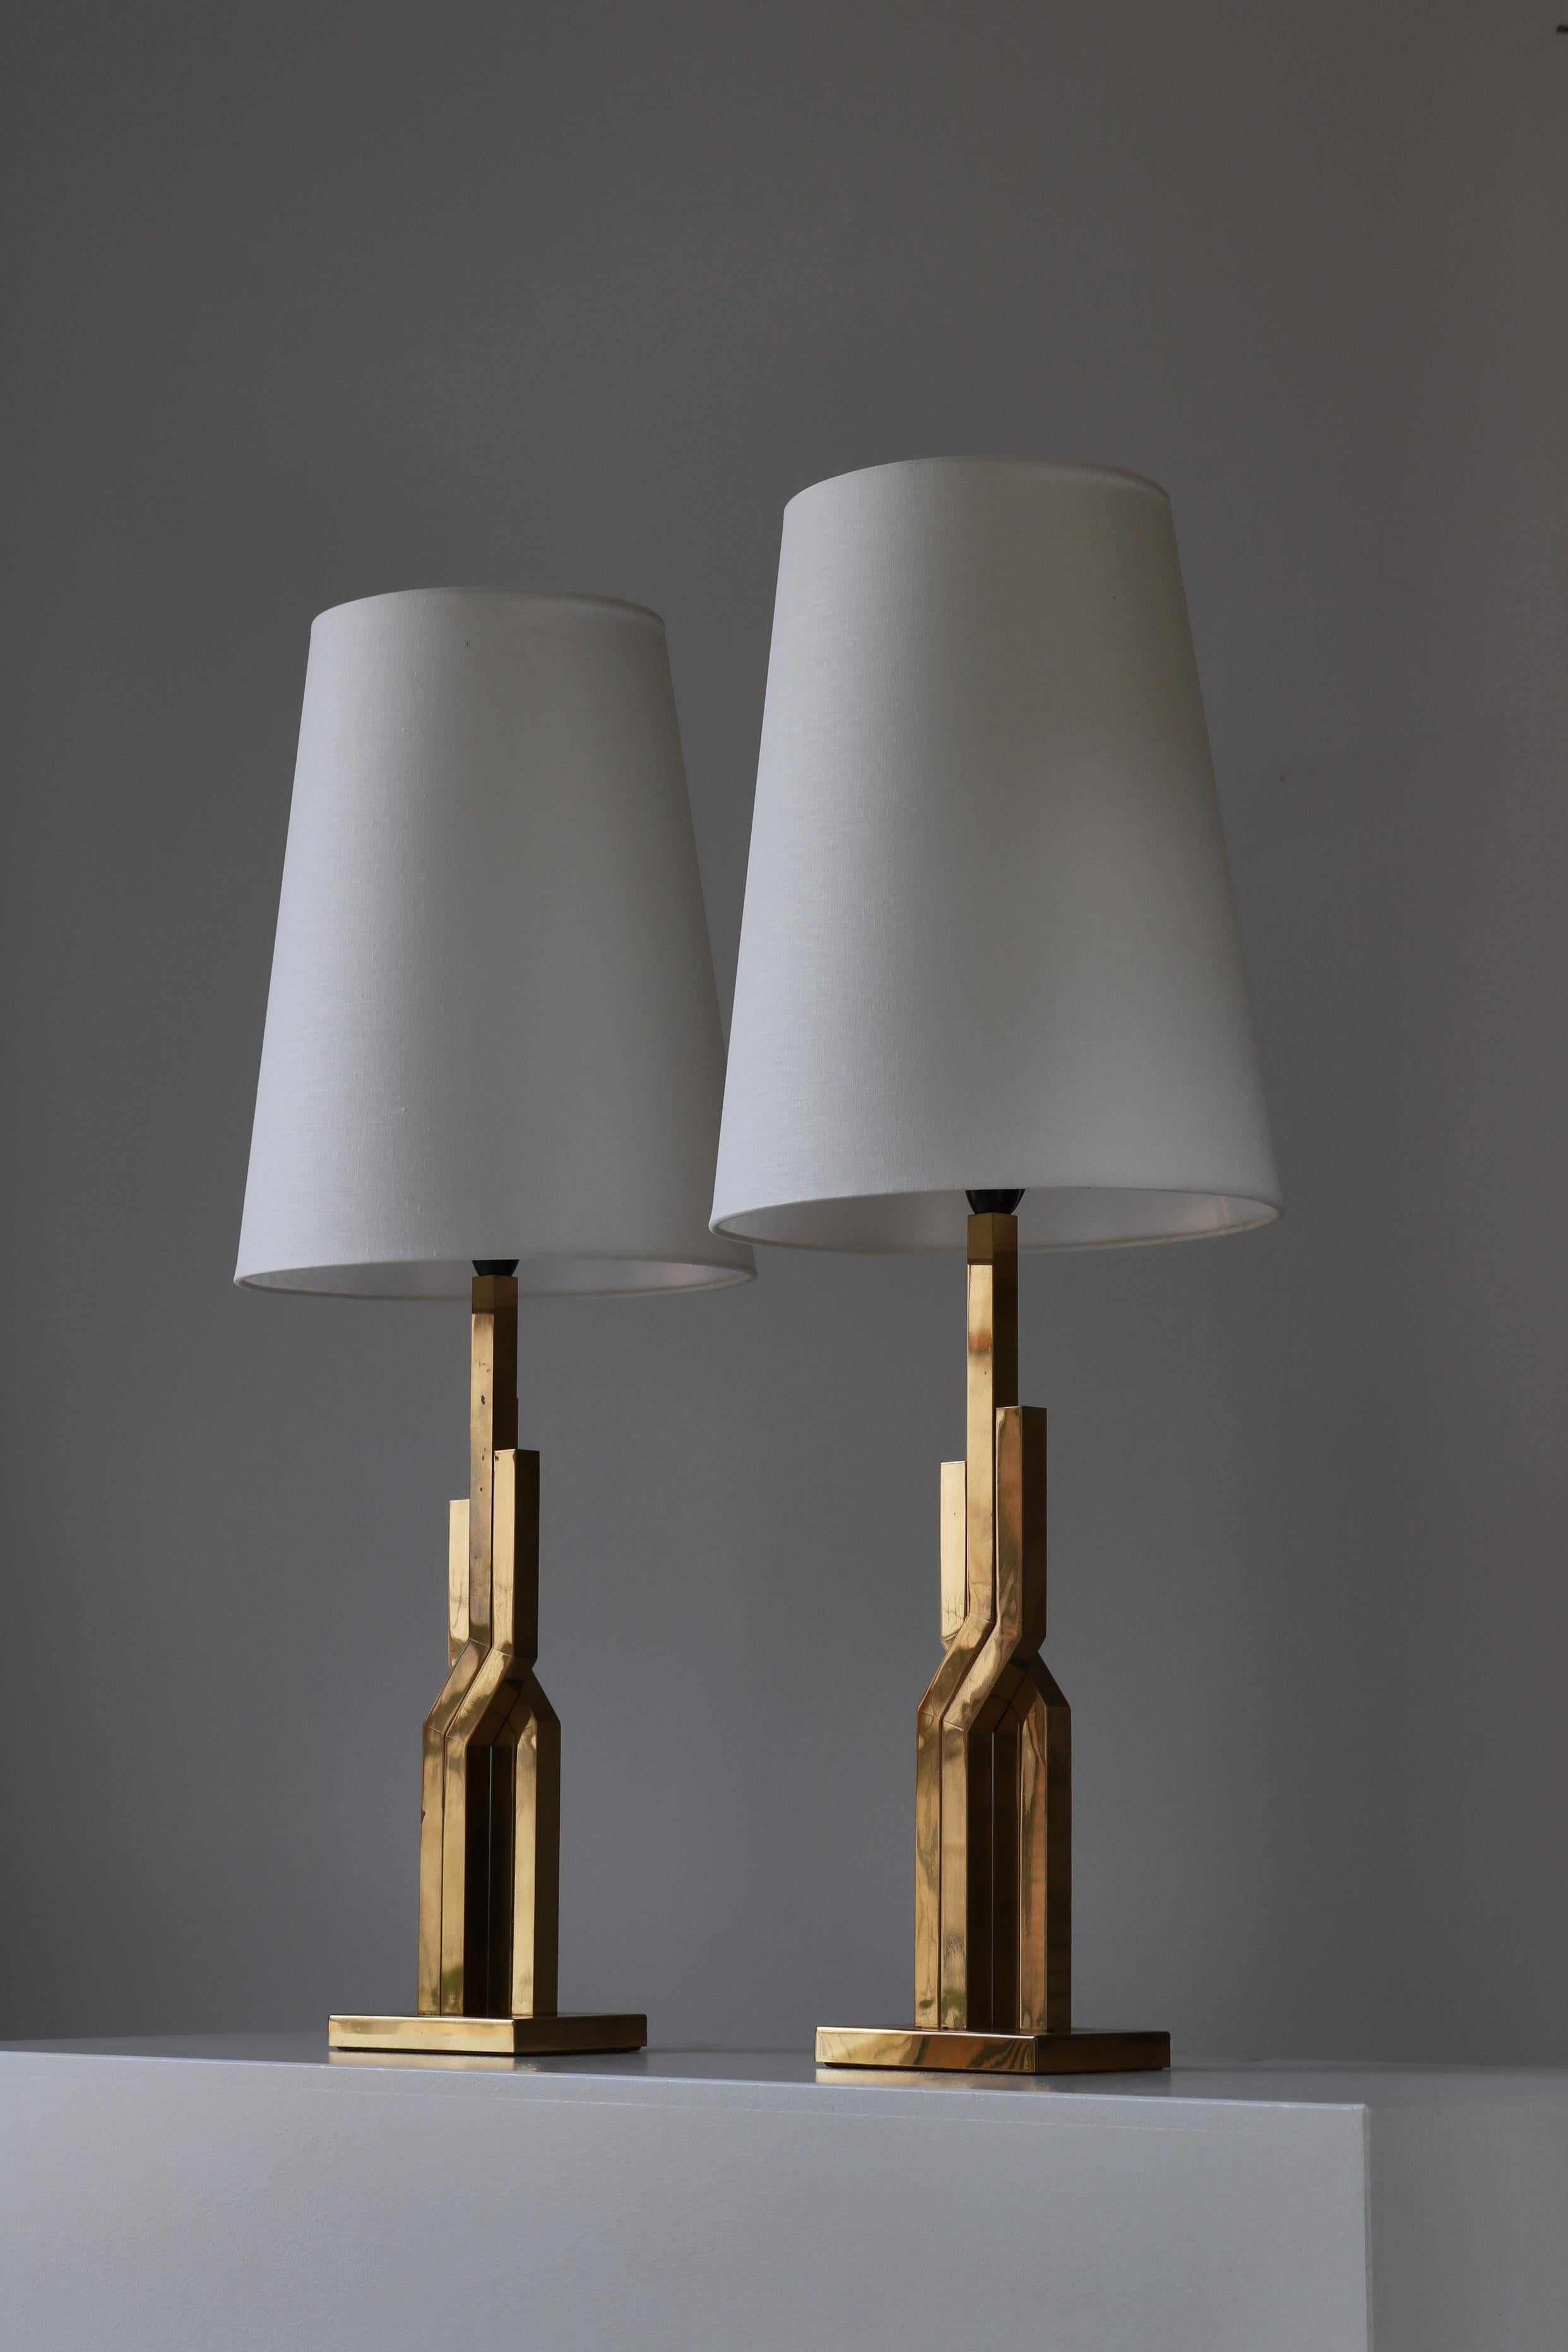 Large Danish Modern Table Lamps in Brass by Svend Aage Holm-Sørensen, 1960s For Sale 2